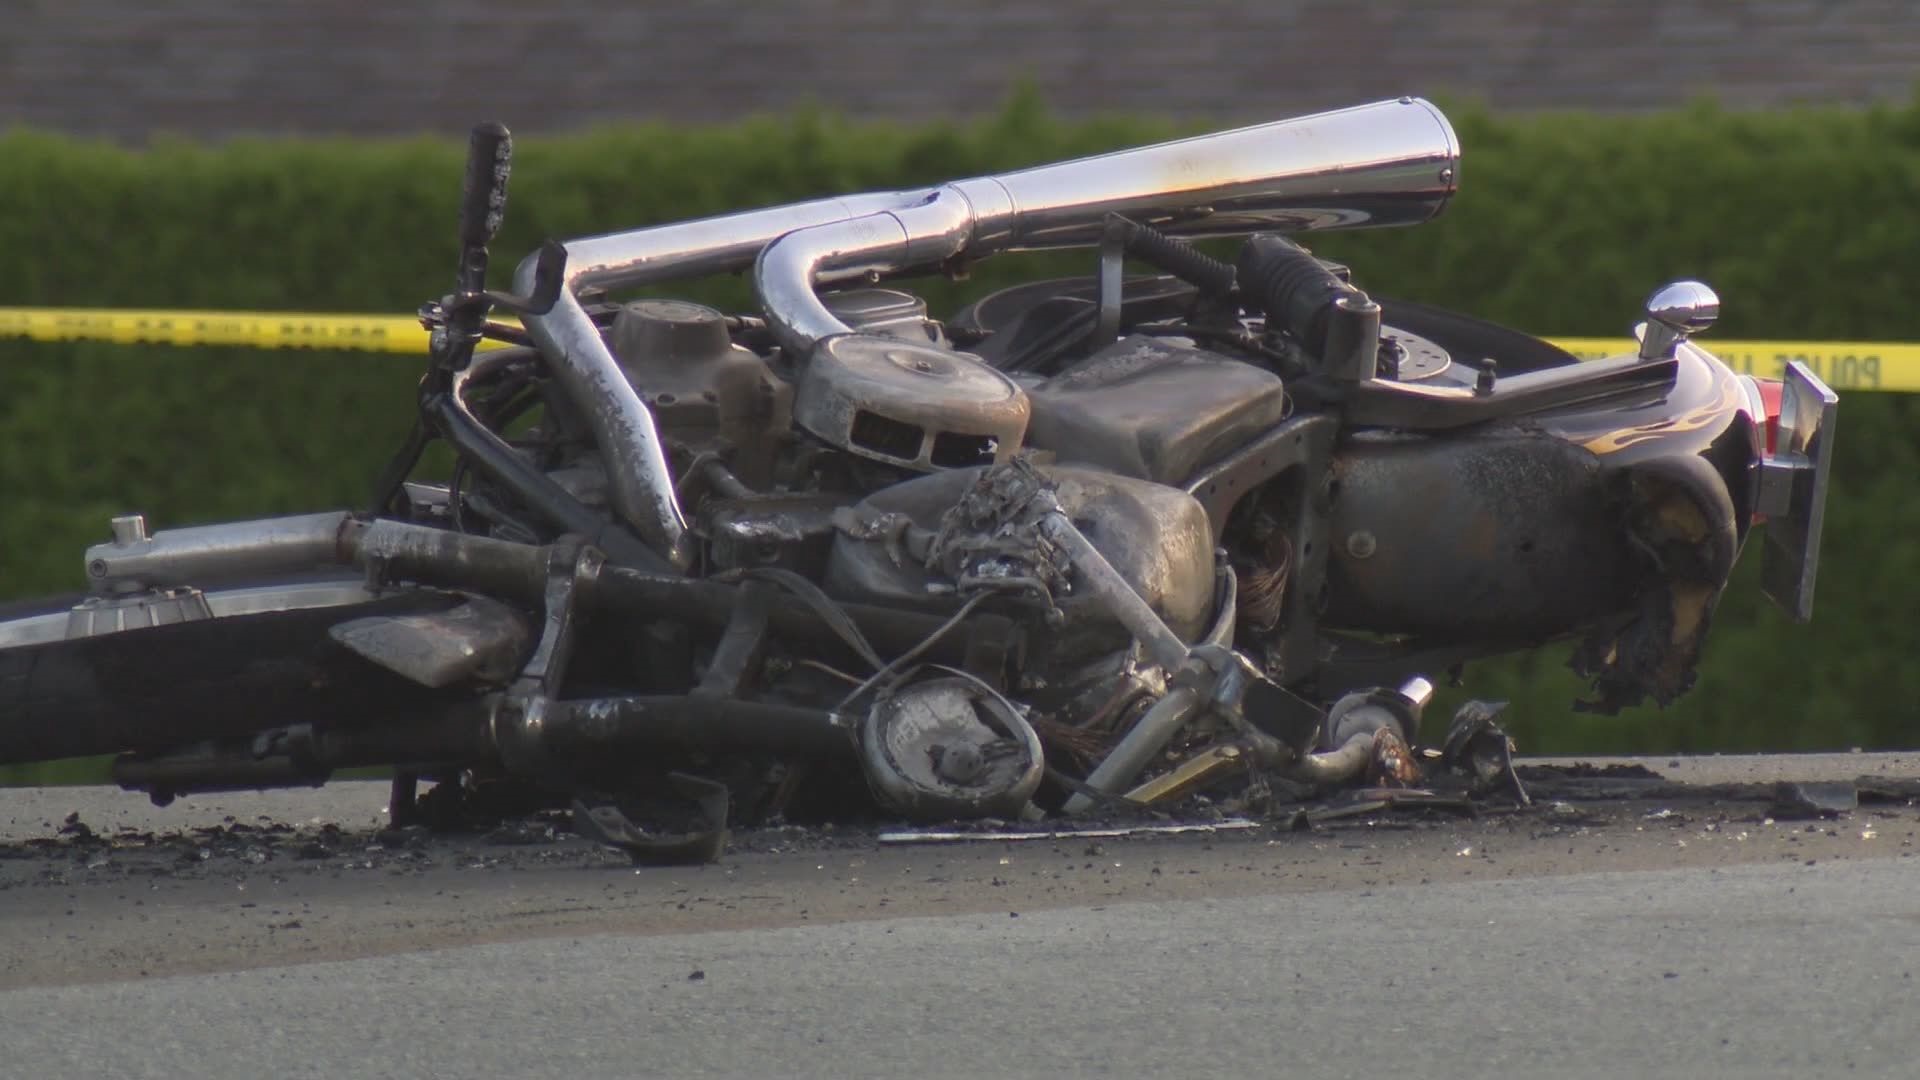 Motorcycle crash in Abbotsford leaves one man dead, speed believed to be a factor